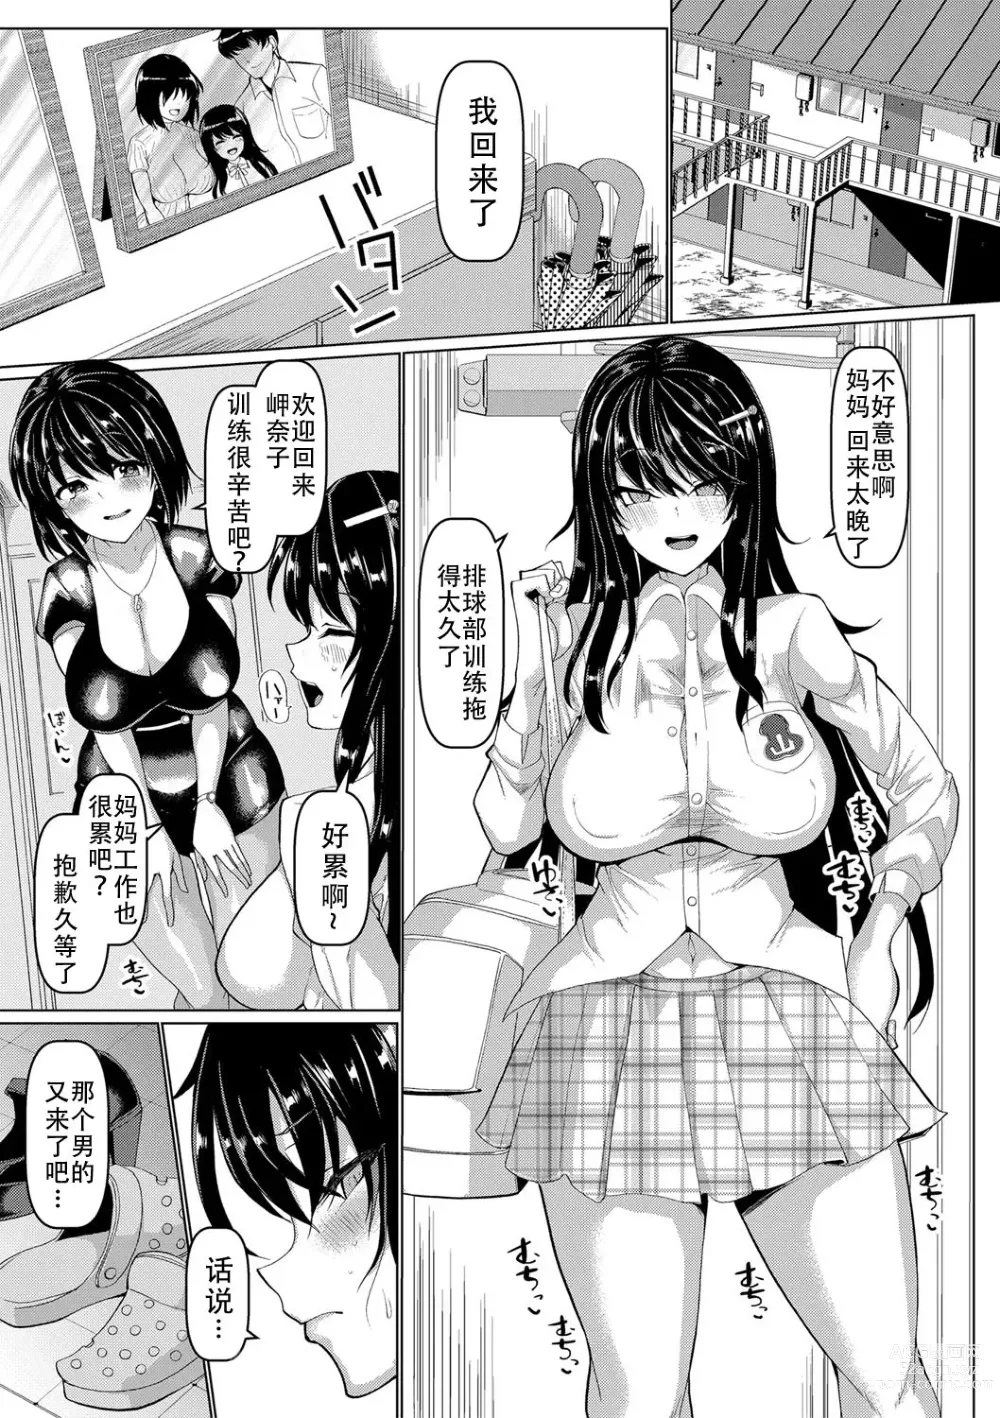 Page 1 of manga Oyako de Nerae! Sex Number One